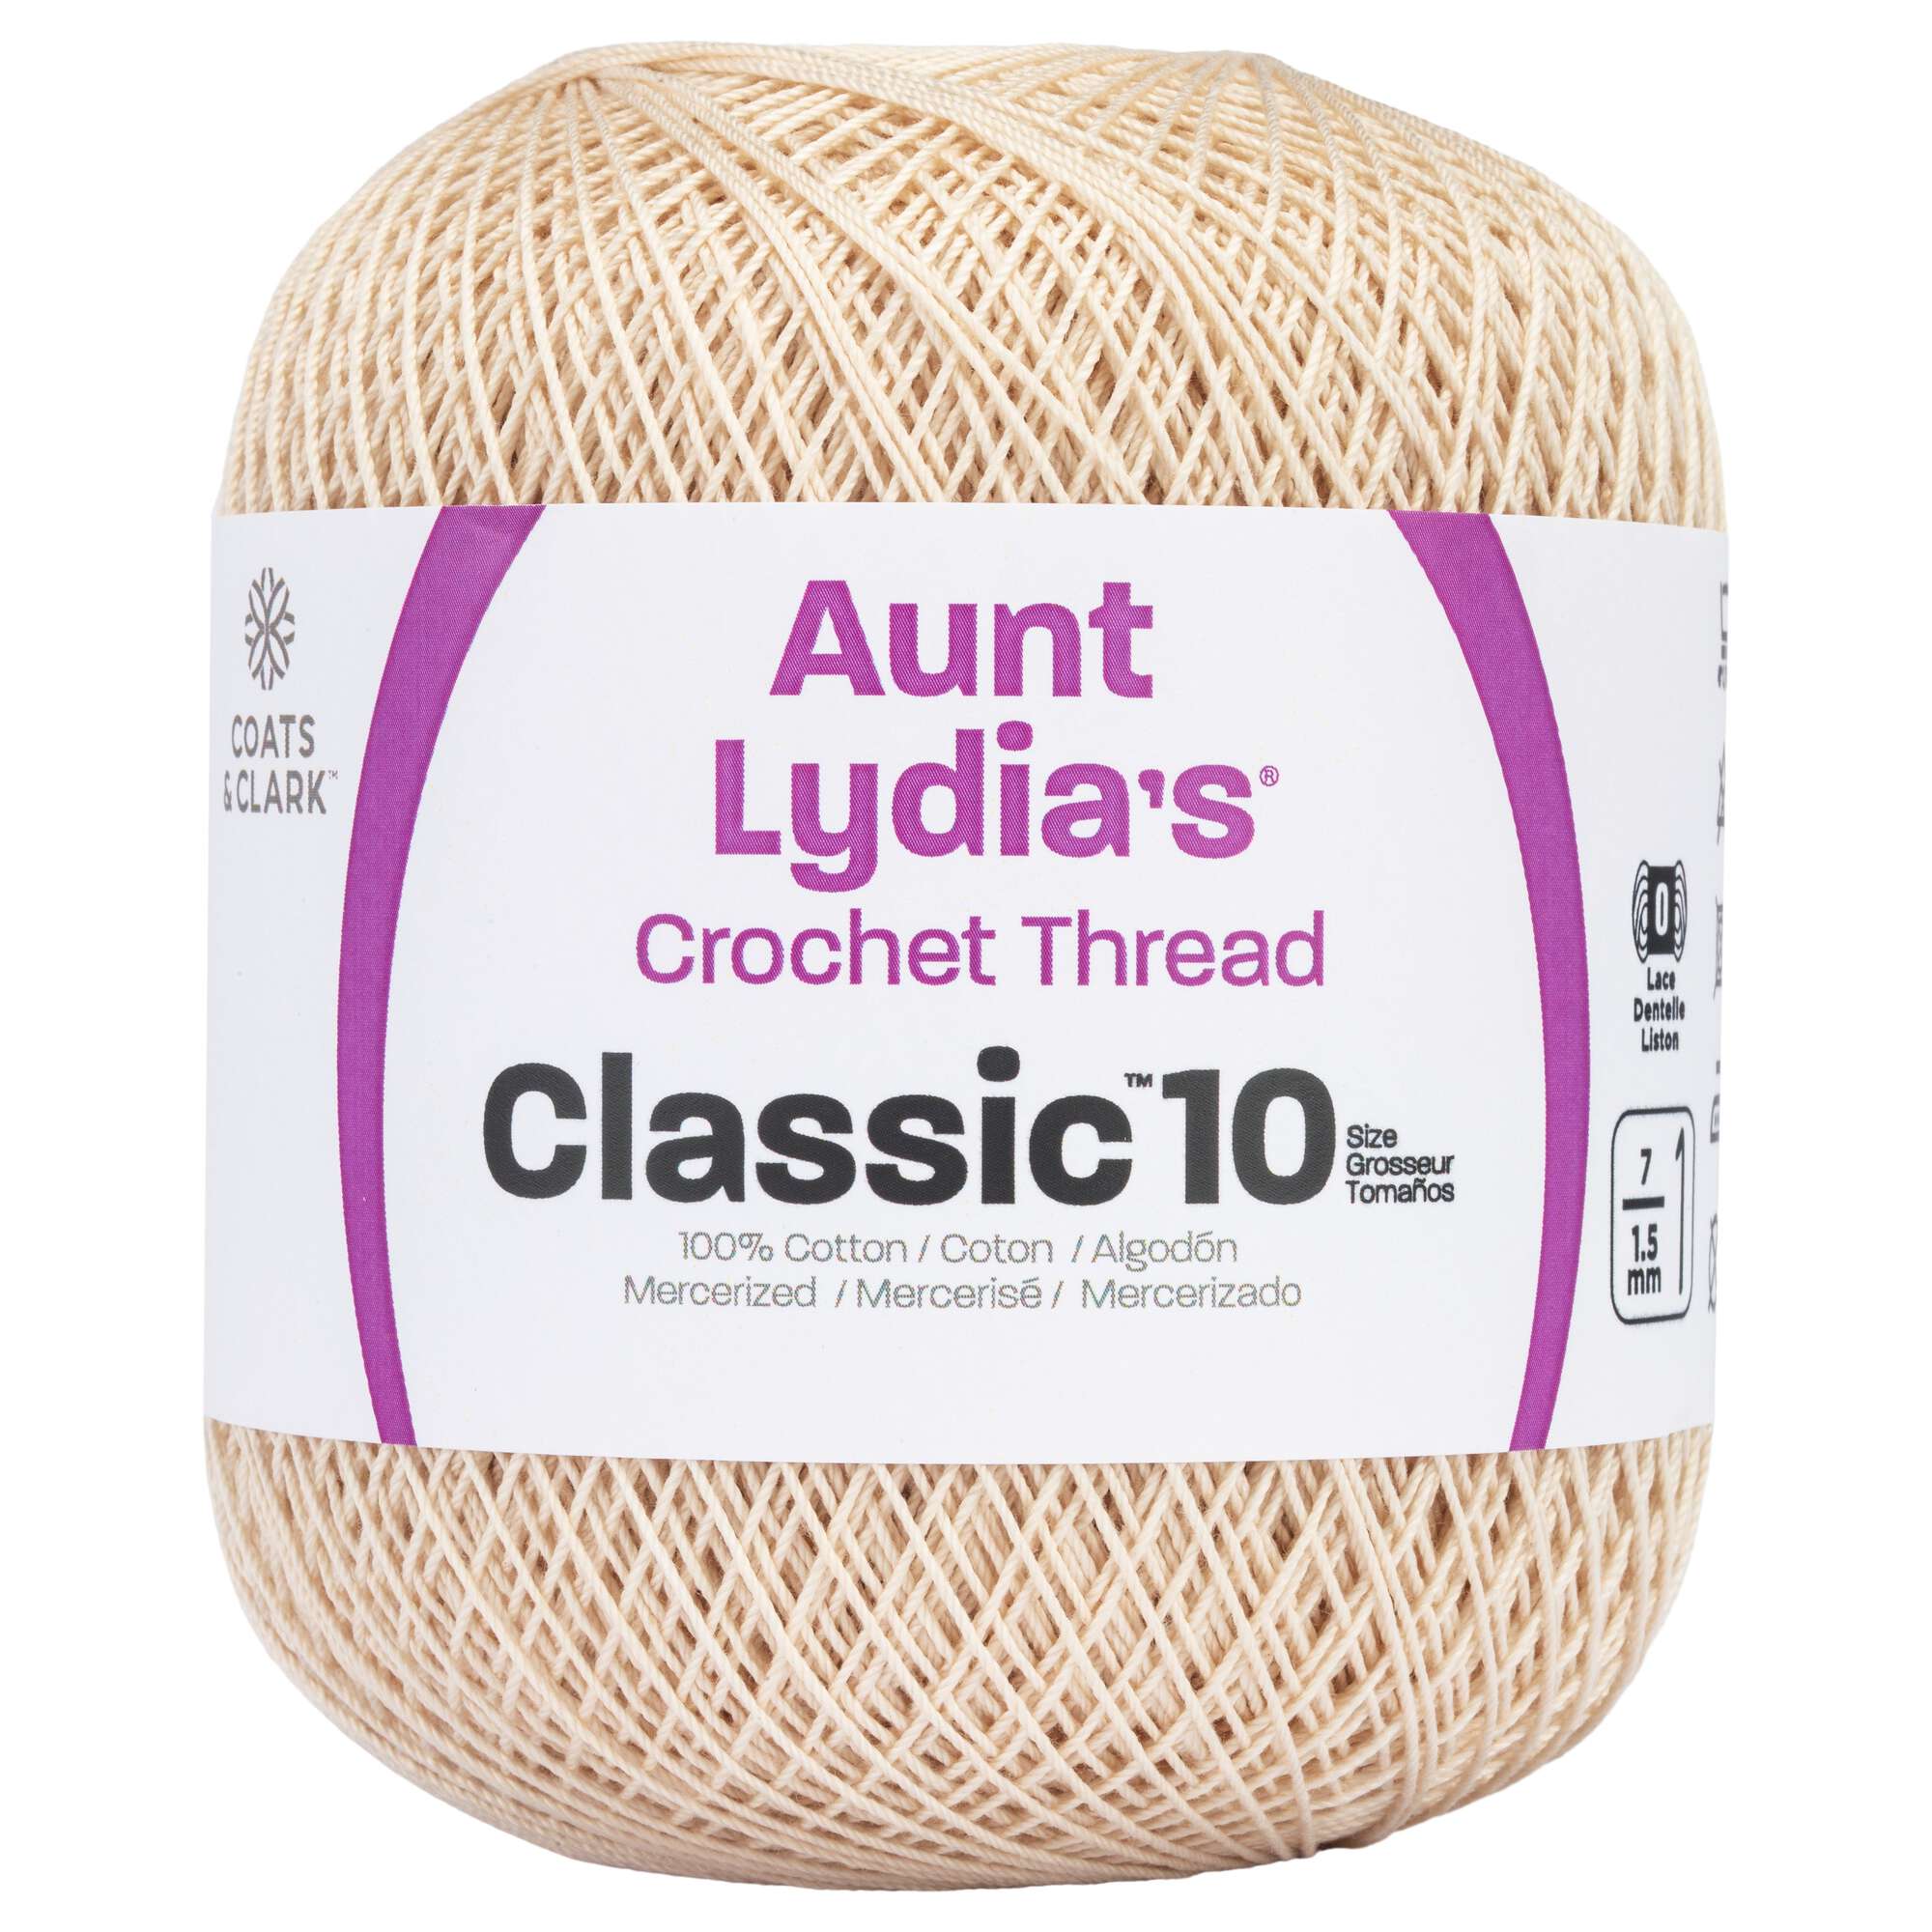 Aunt Lydia's Classic Crochet Thread Size 10 - Frosty Green